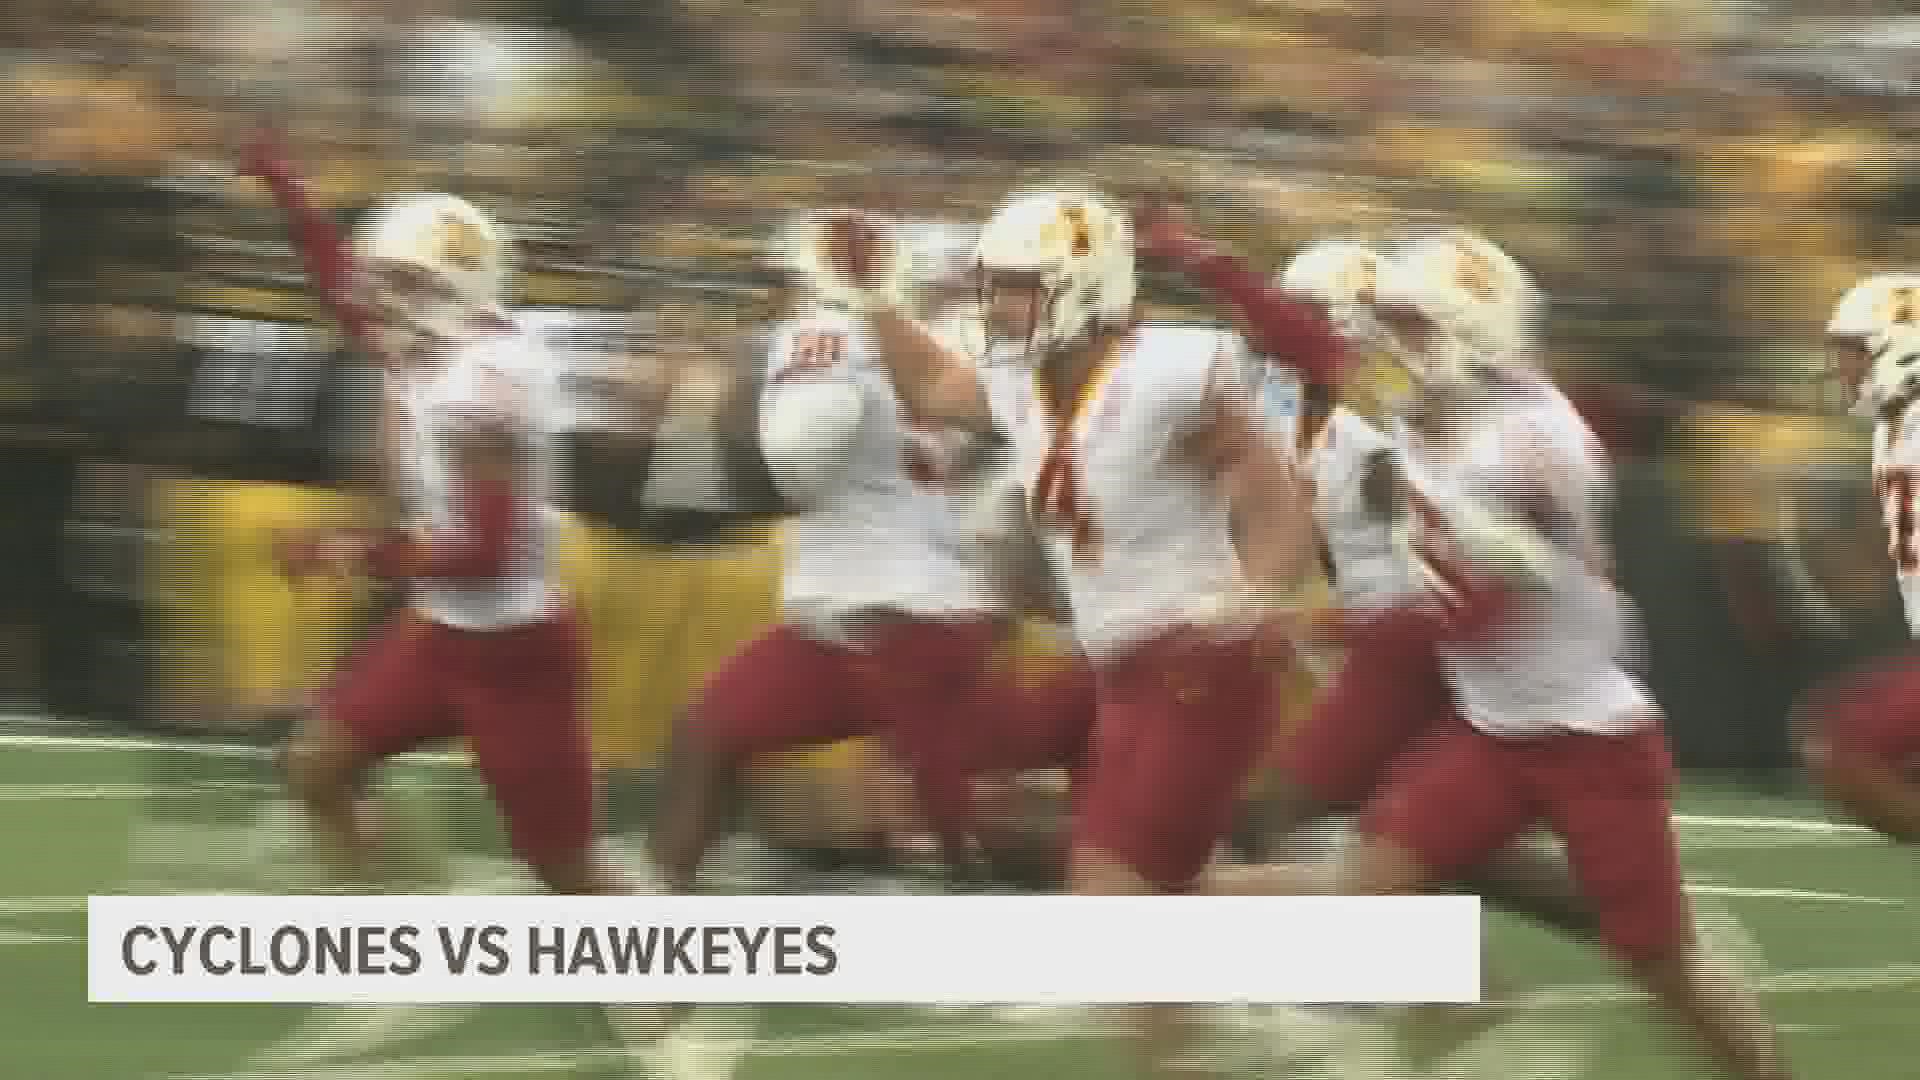 The 21-play possession that started in the 3rdquarter took 11 minutes, 49 seconds off the clock, and helped the Cyclones end a 6 game losing streak to the Hawkeyes.